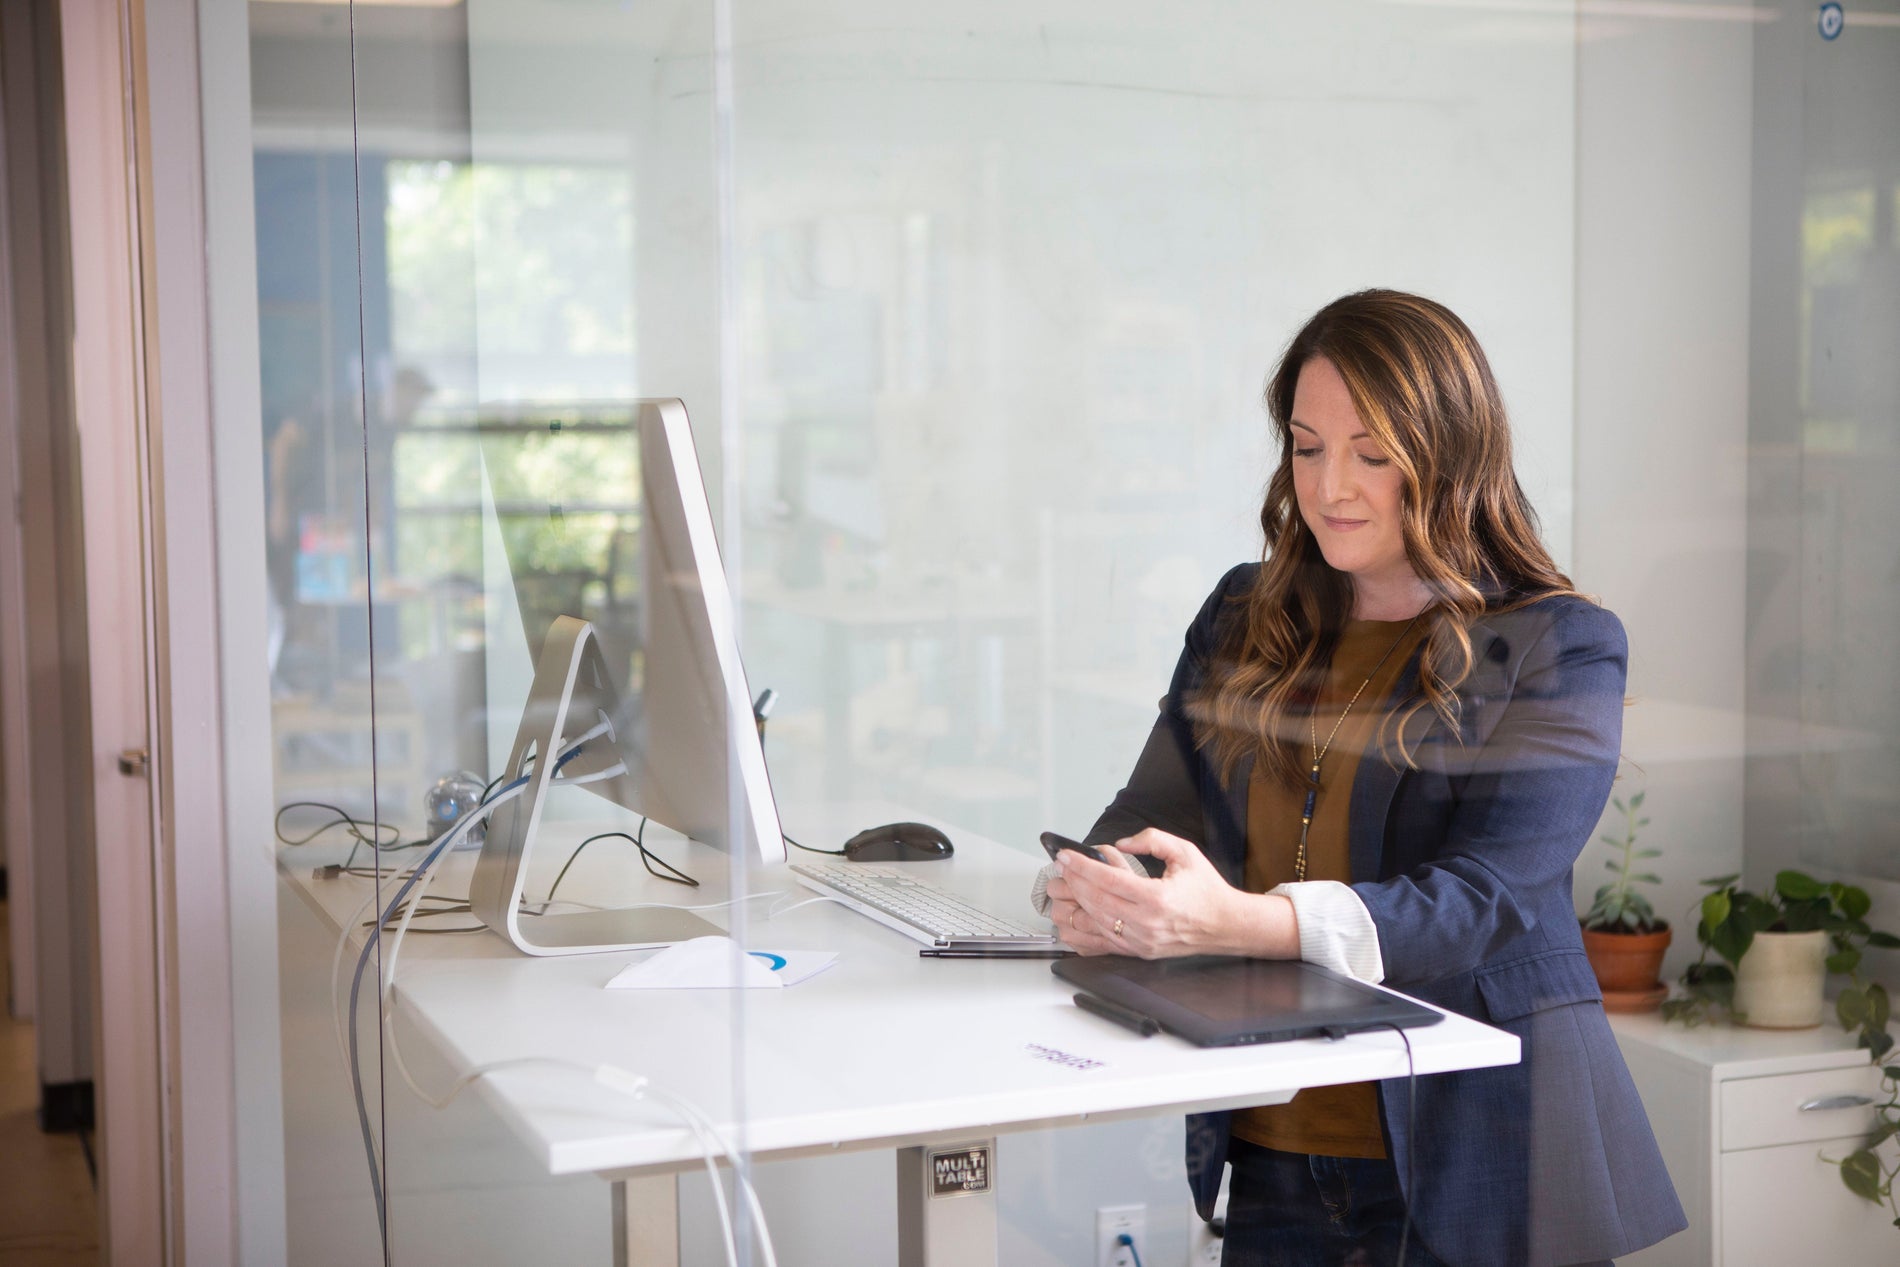 Standing Desks: The Benefits And Risks Of Standing At Work